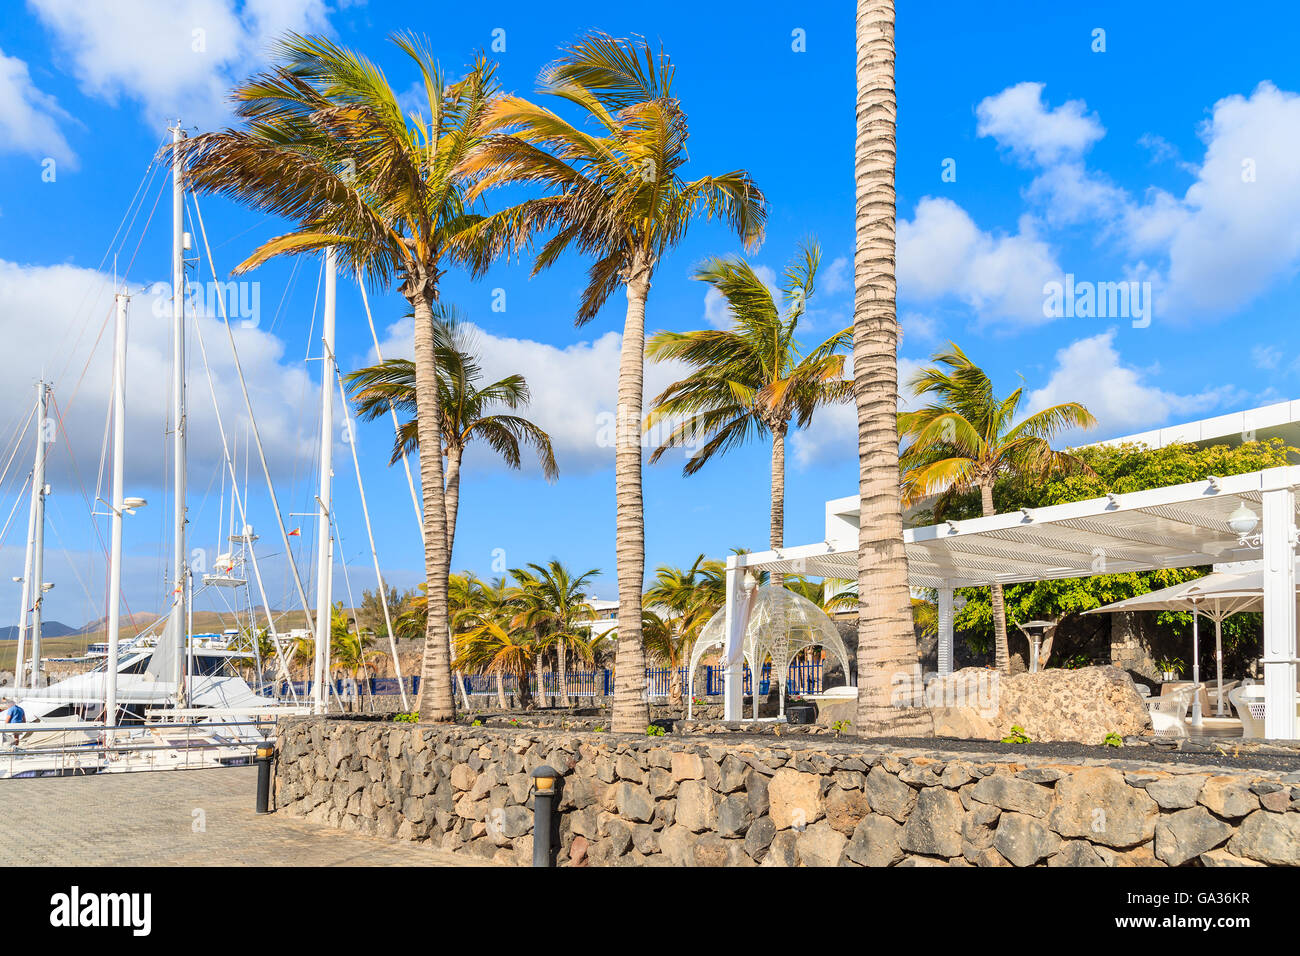 Palm trees in Caribbean style port for yacht boats, Puerto Calero, Lanzarote island, Spain Stock Photo